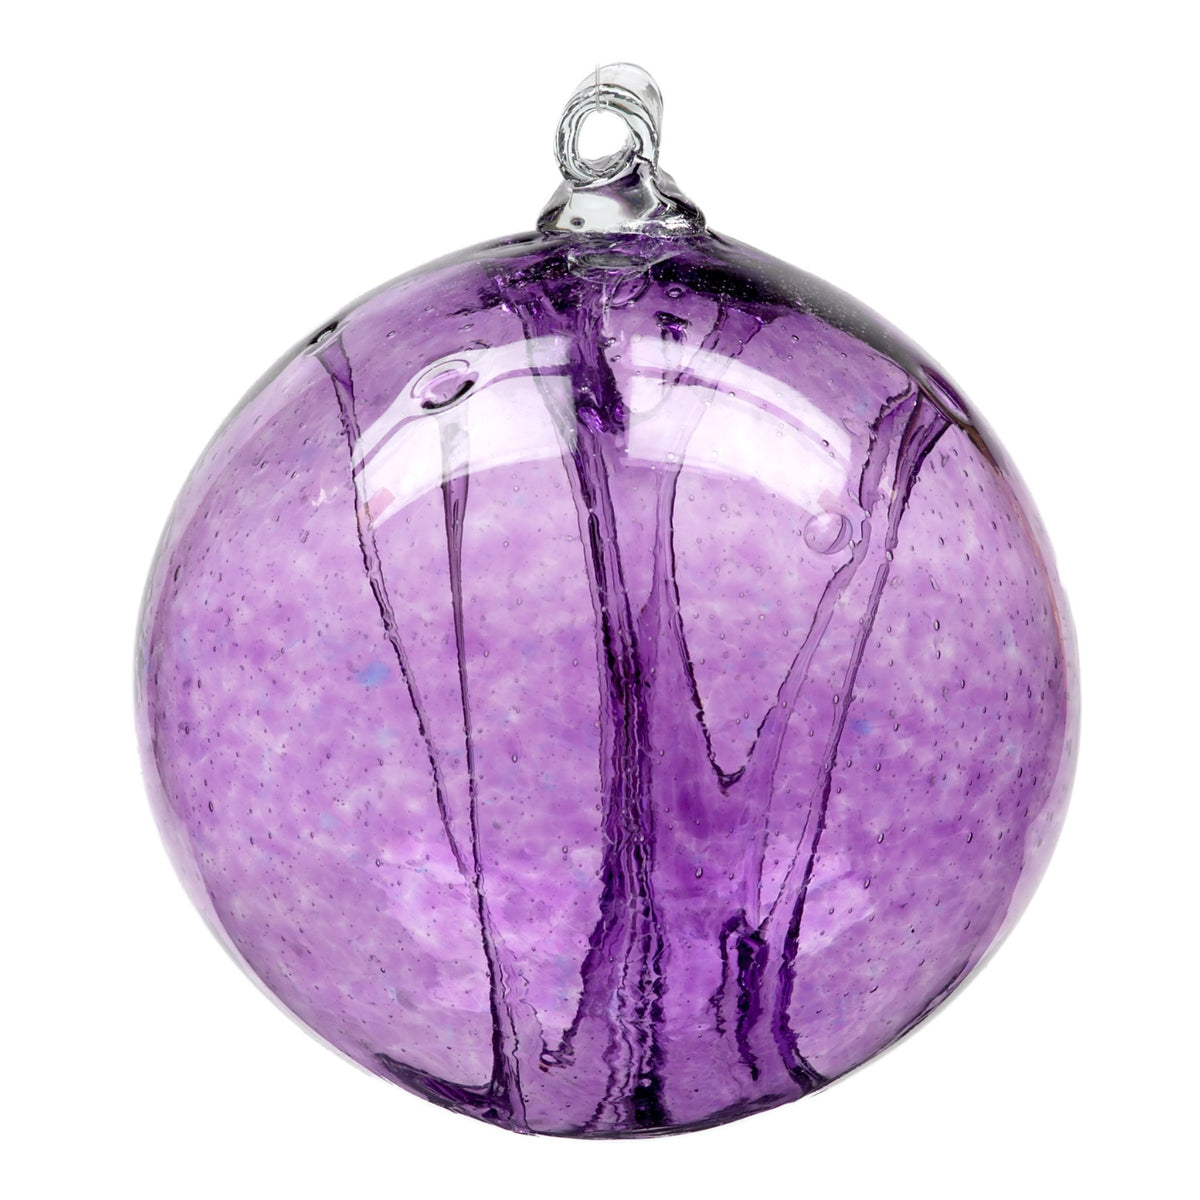 Olde English Witch Ball | Amethyst 6&quot; Hand-blown Art Glass Ornament